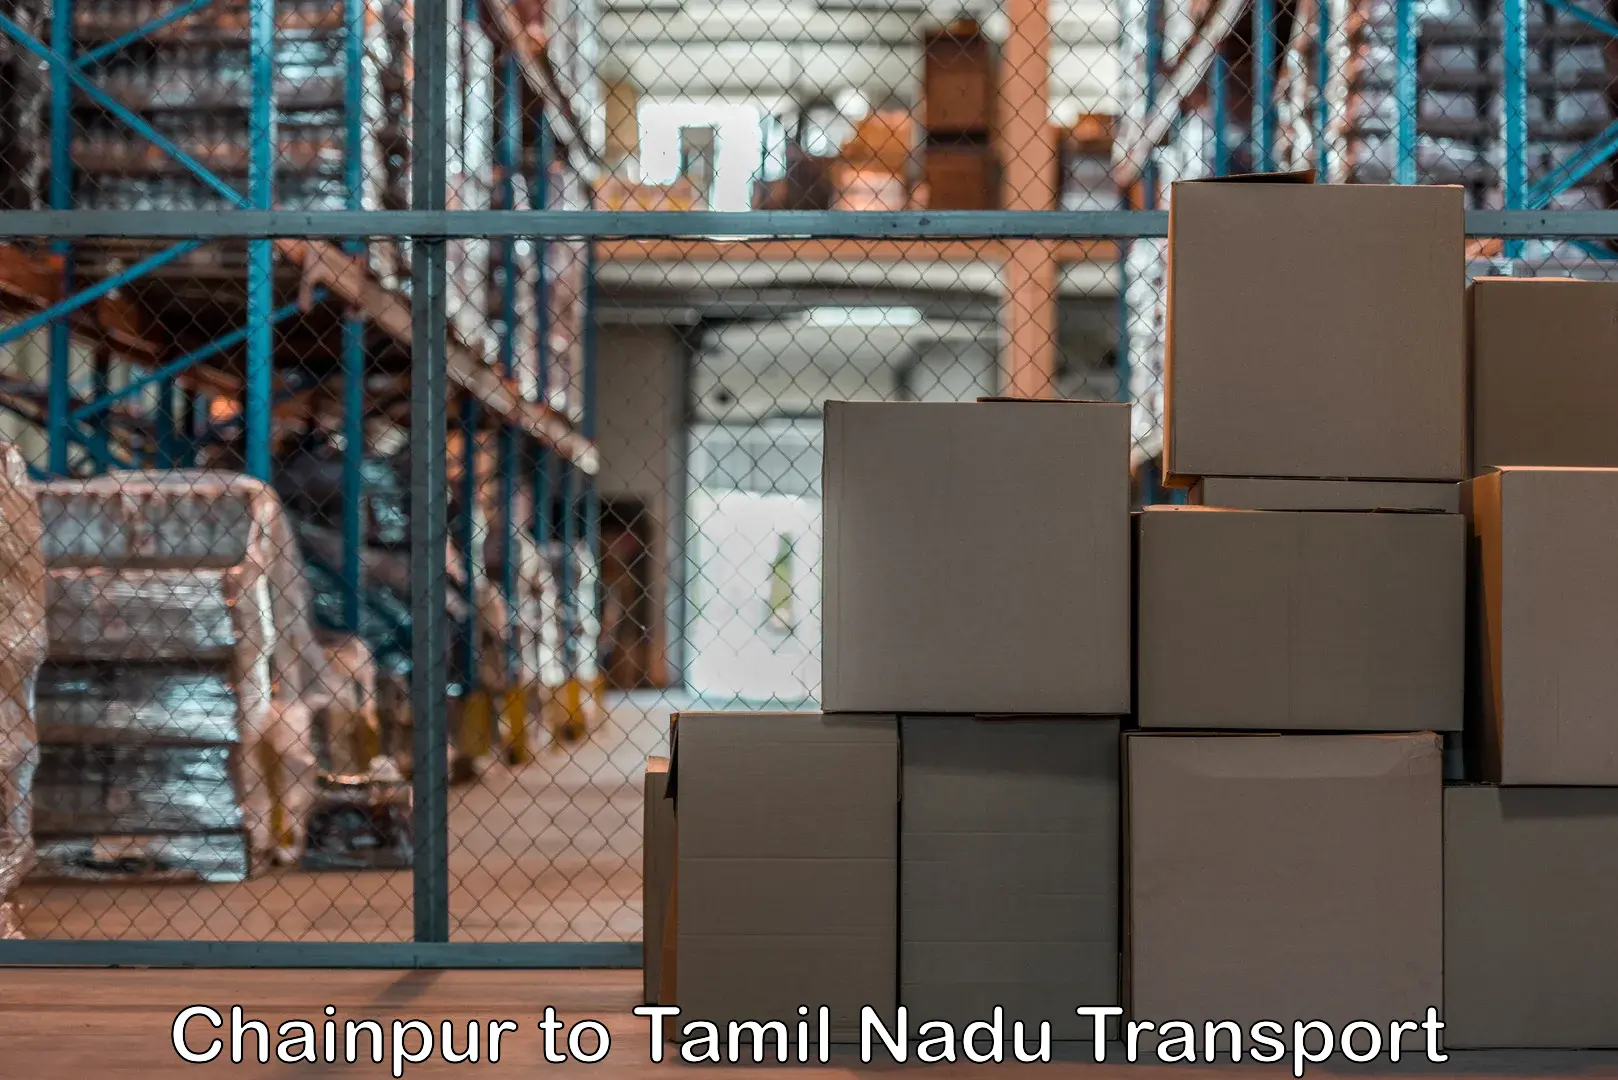 Domestic goods transportation services in Chainpur to Tiruppur